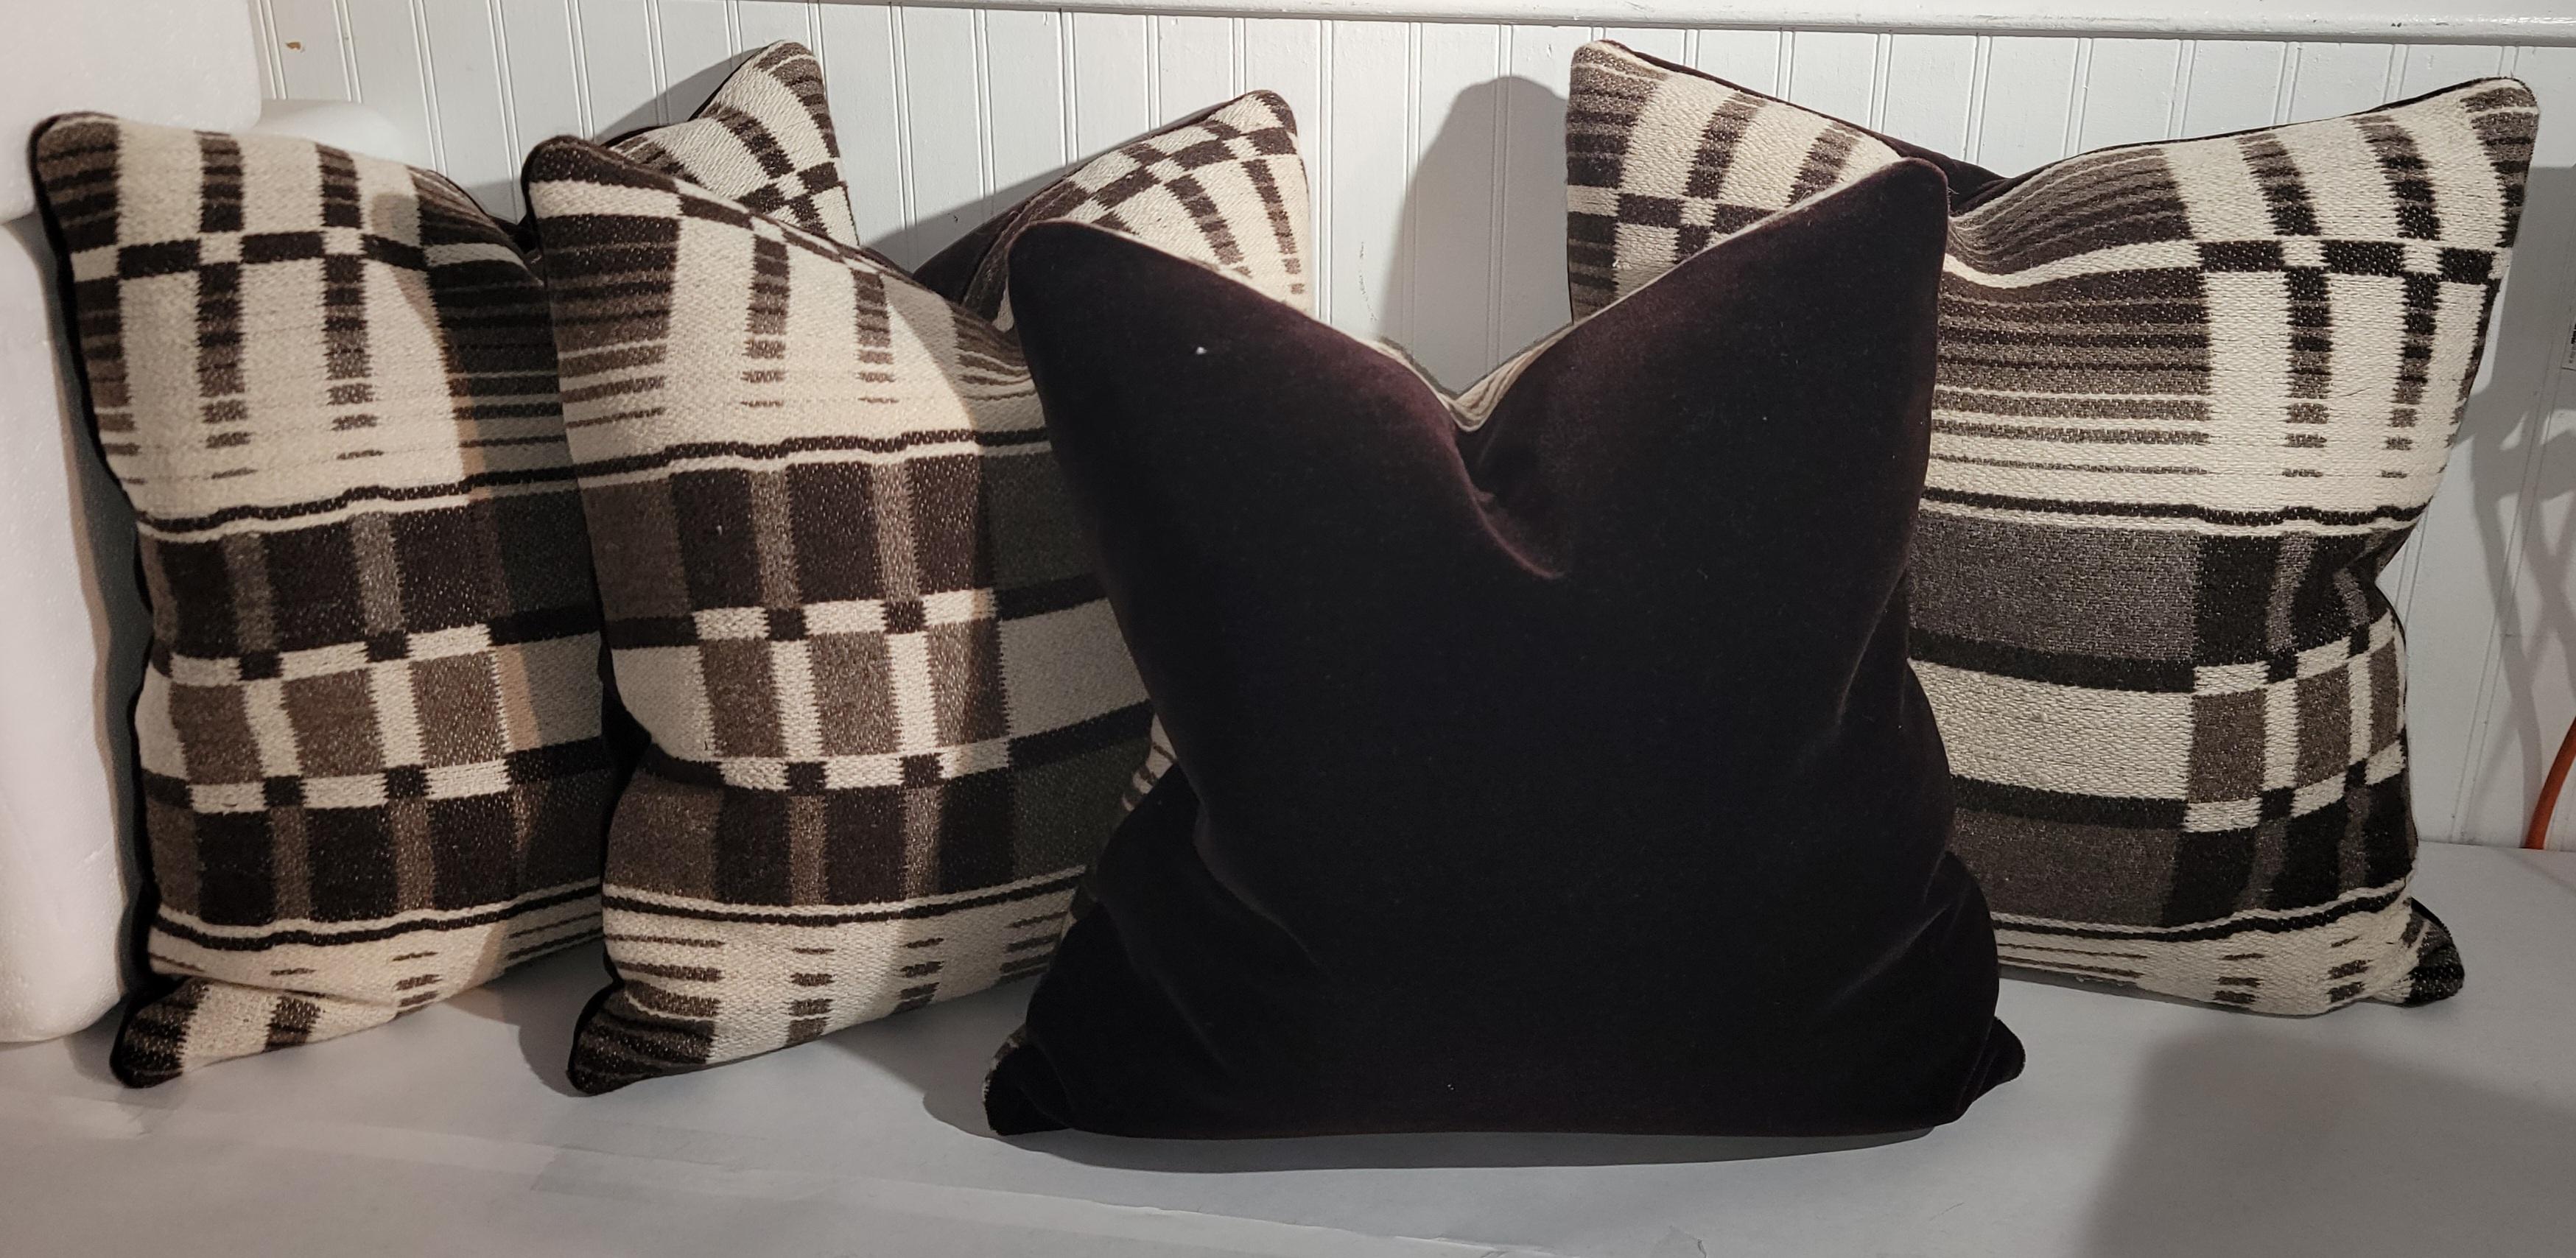 These amazing hand woven cotton horse blanket pillows are in fine condition and sold as a collection of four pillows.Two pairs of pillows.